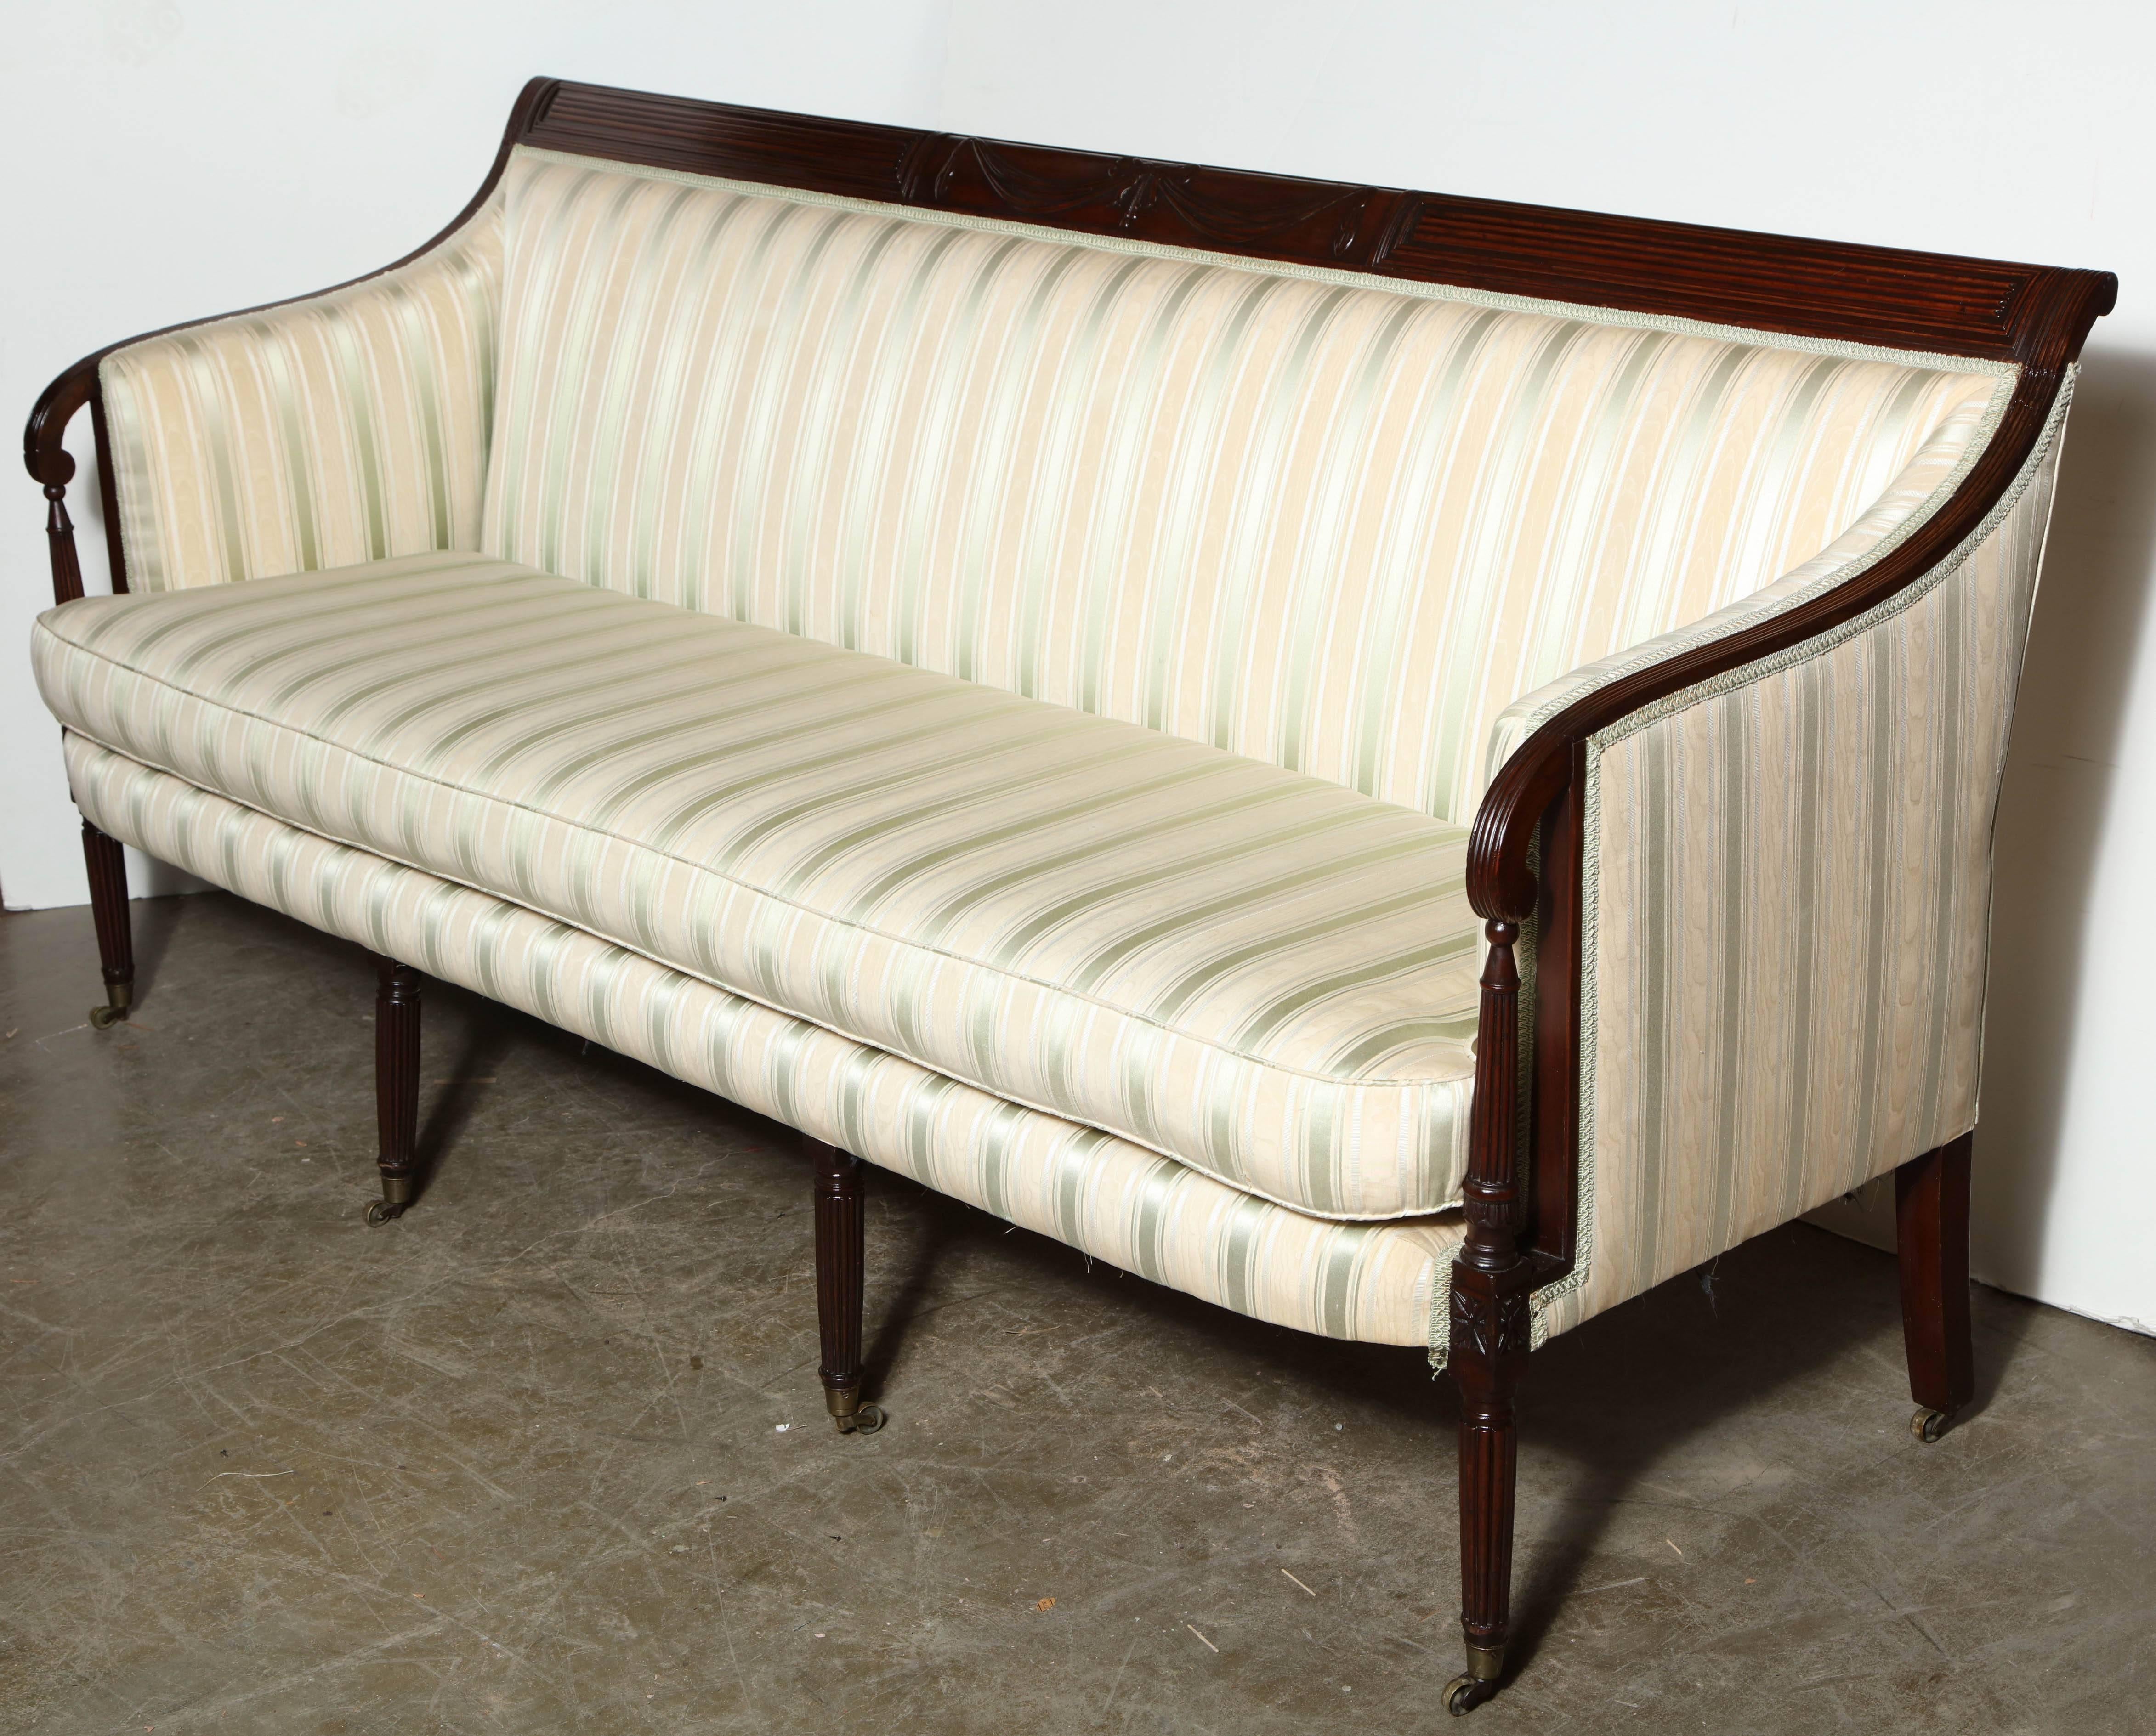 An America, New York, Federal sofa with bowknot and drapery carving, reeded legs with casters.
Attributed to Duncan Phyfe.